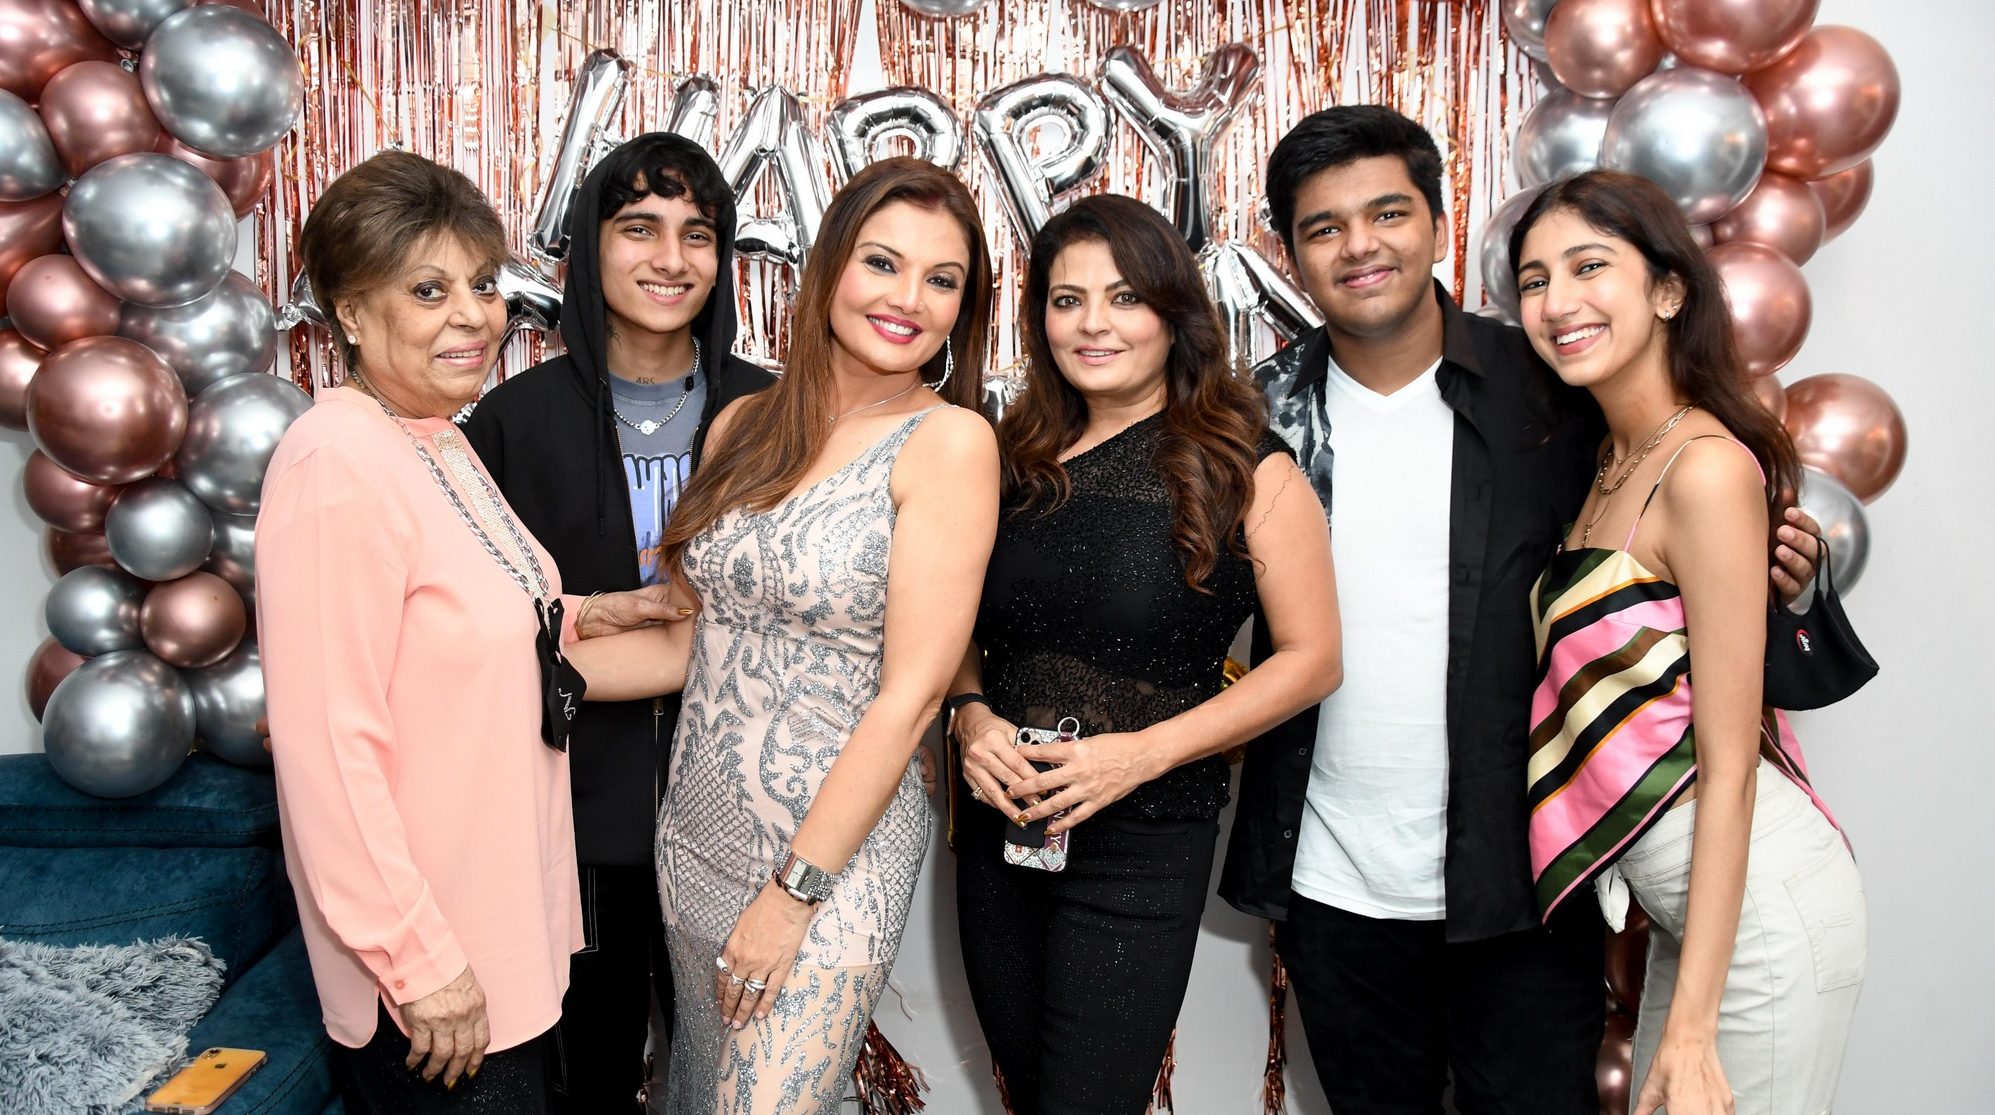 Deepshikha Nagpal celebrated her birthday with loads of bling, positivity, and happiness!